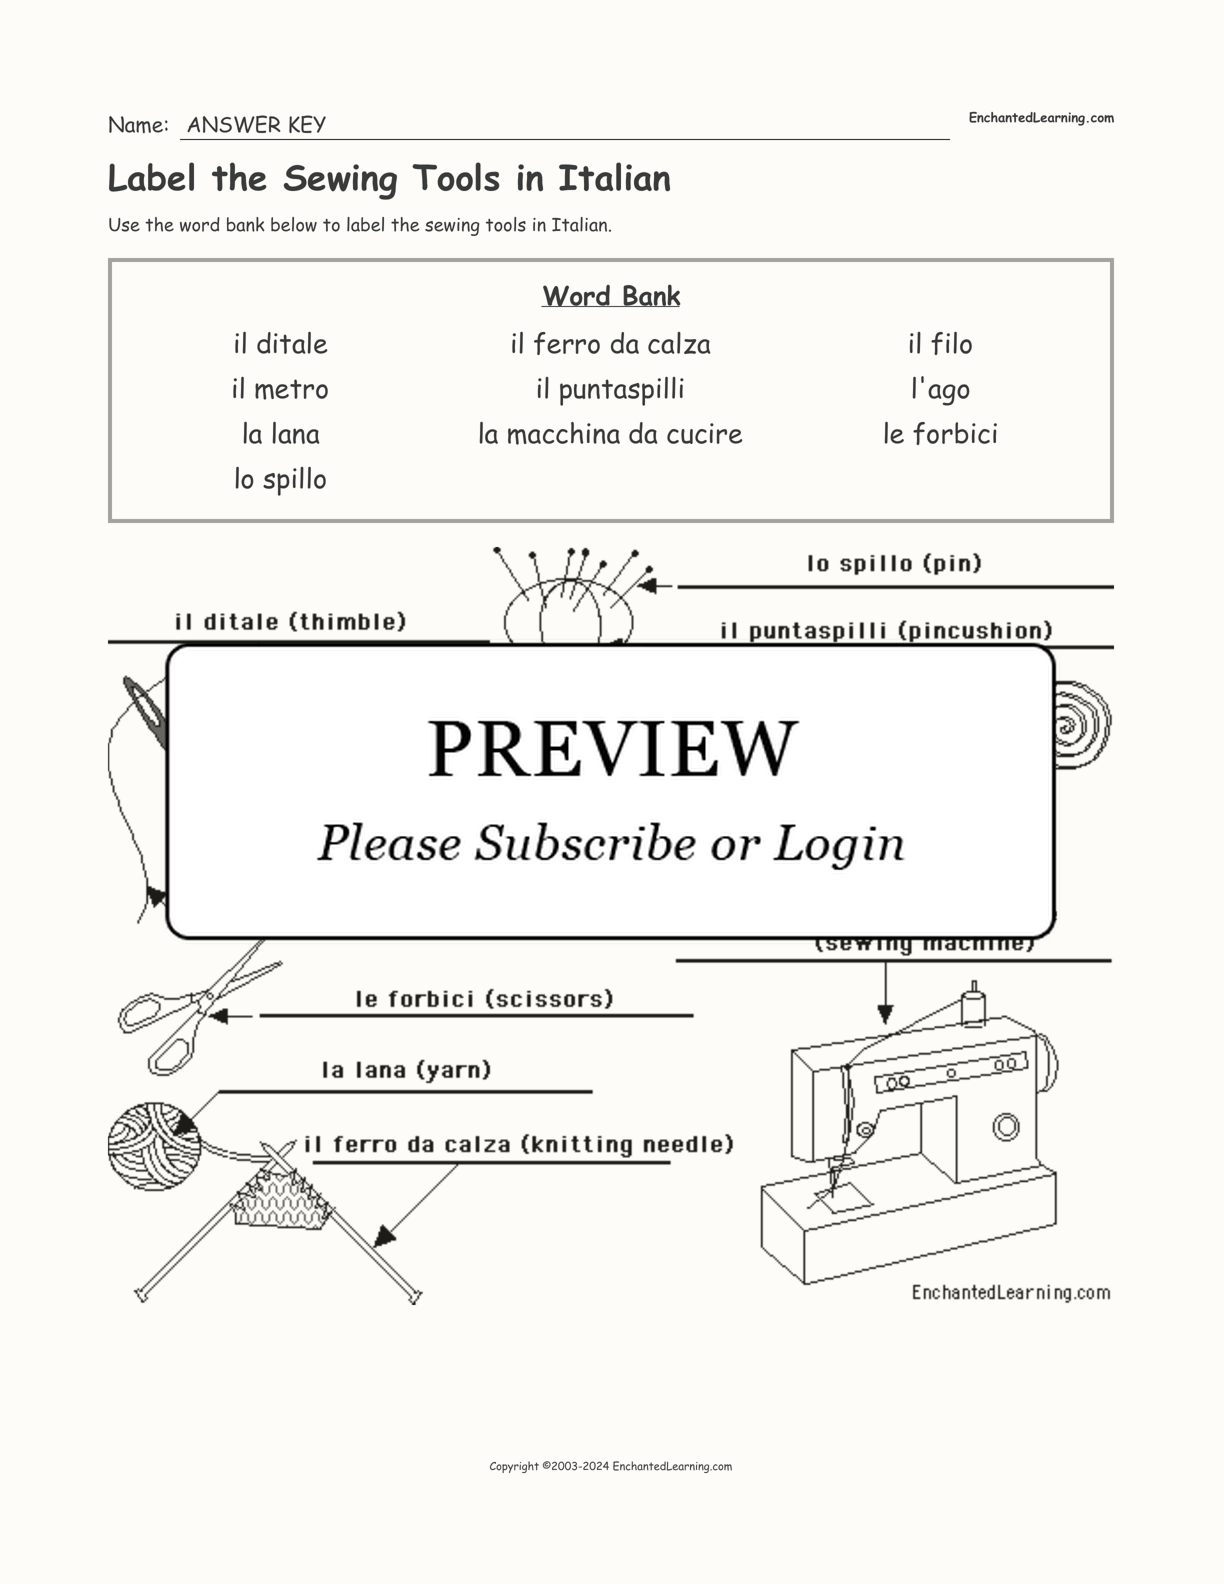 Label the Sewing Tools in Italian interactive worksheet page 2